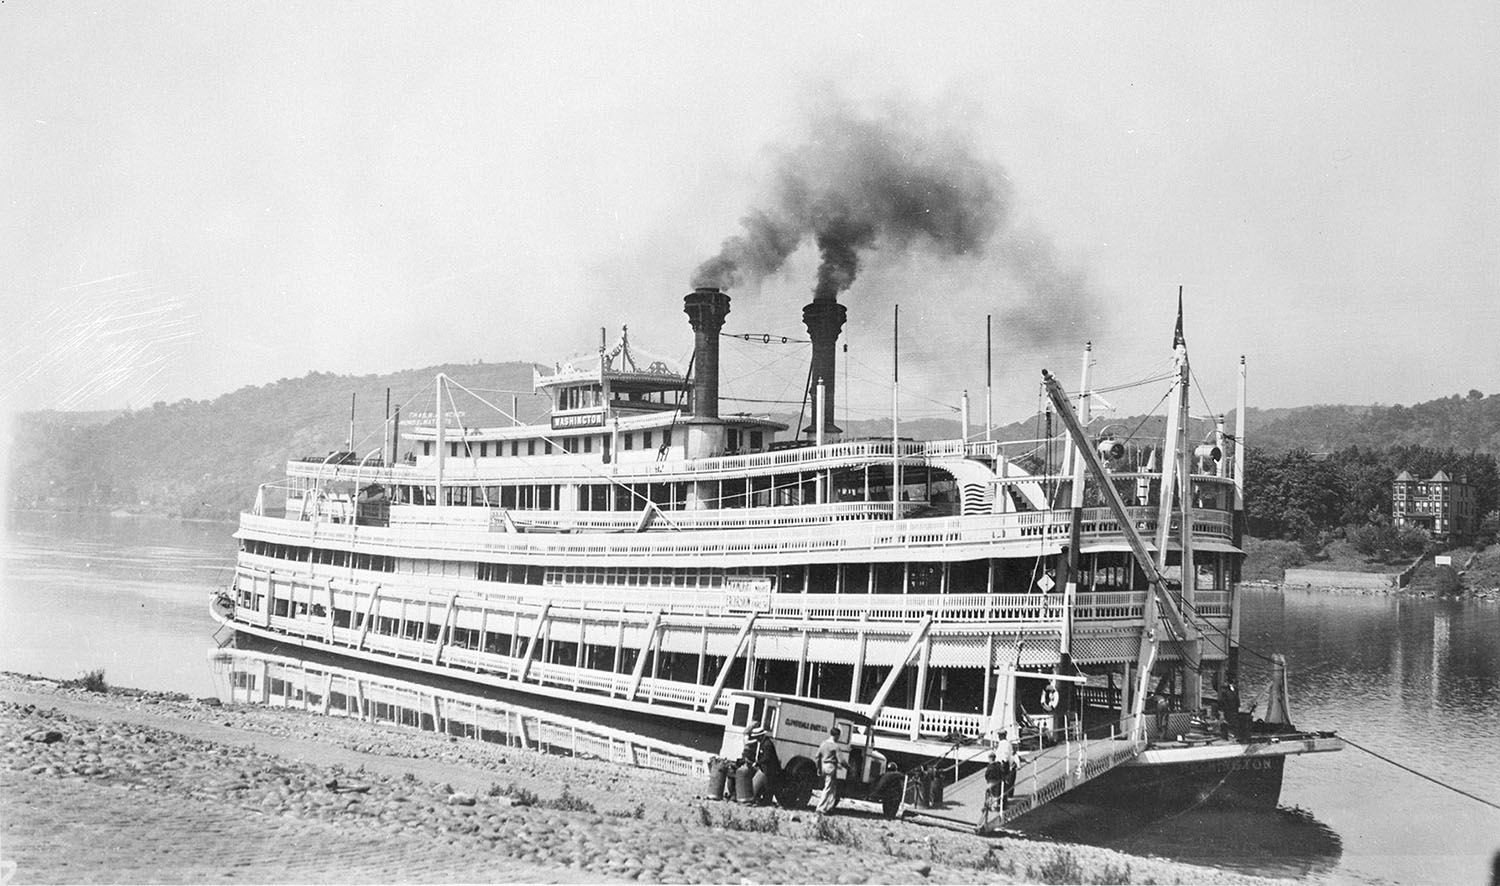 The Washington was built at Murraysville, W.Va., and completed at Wheeling, W.Va., in 1880. (David Smith collection)